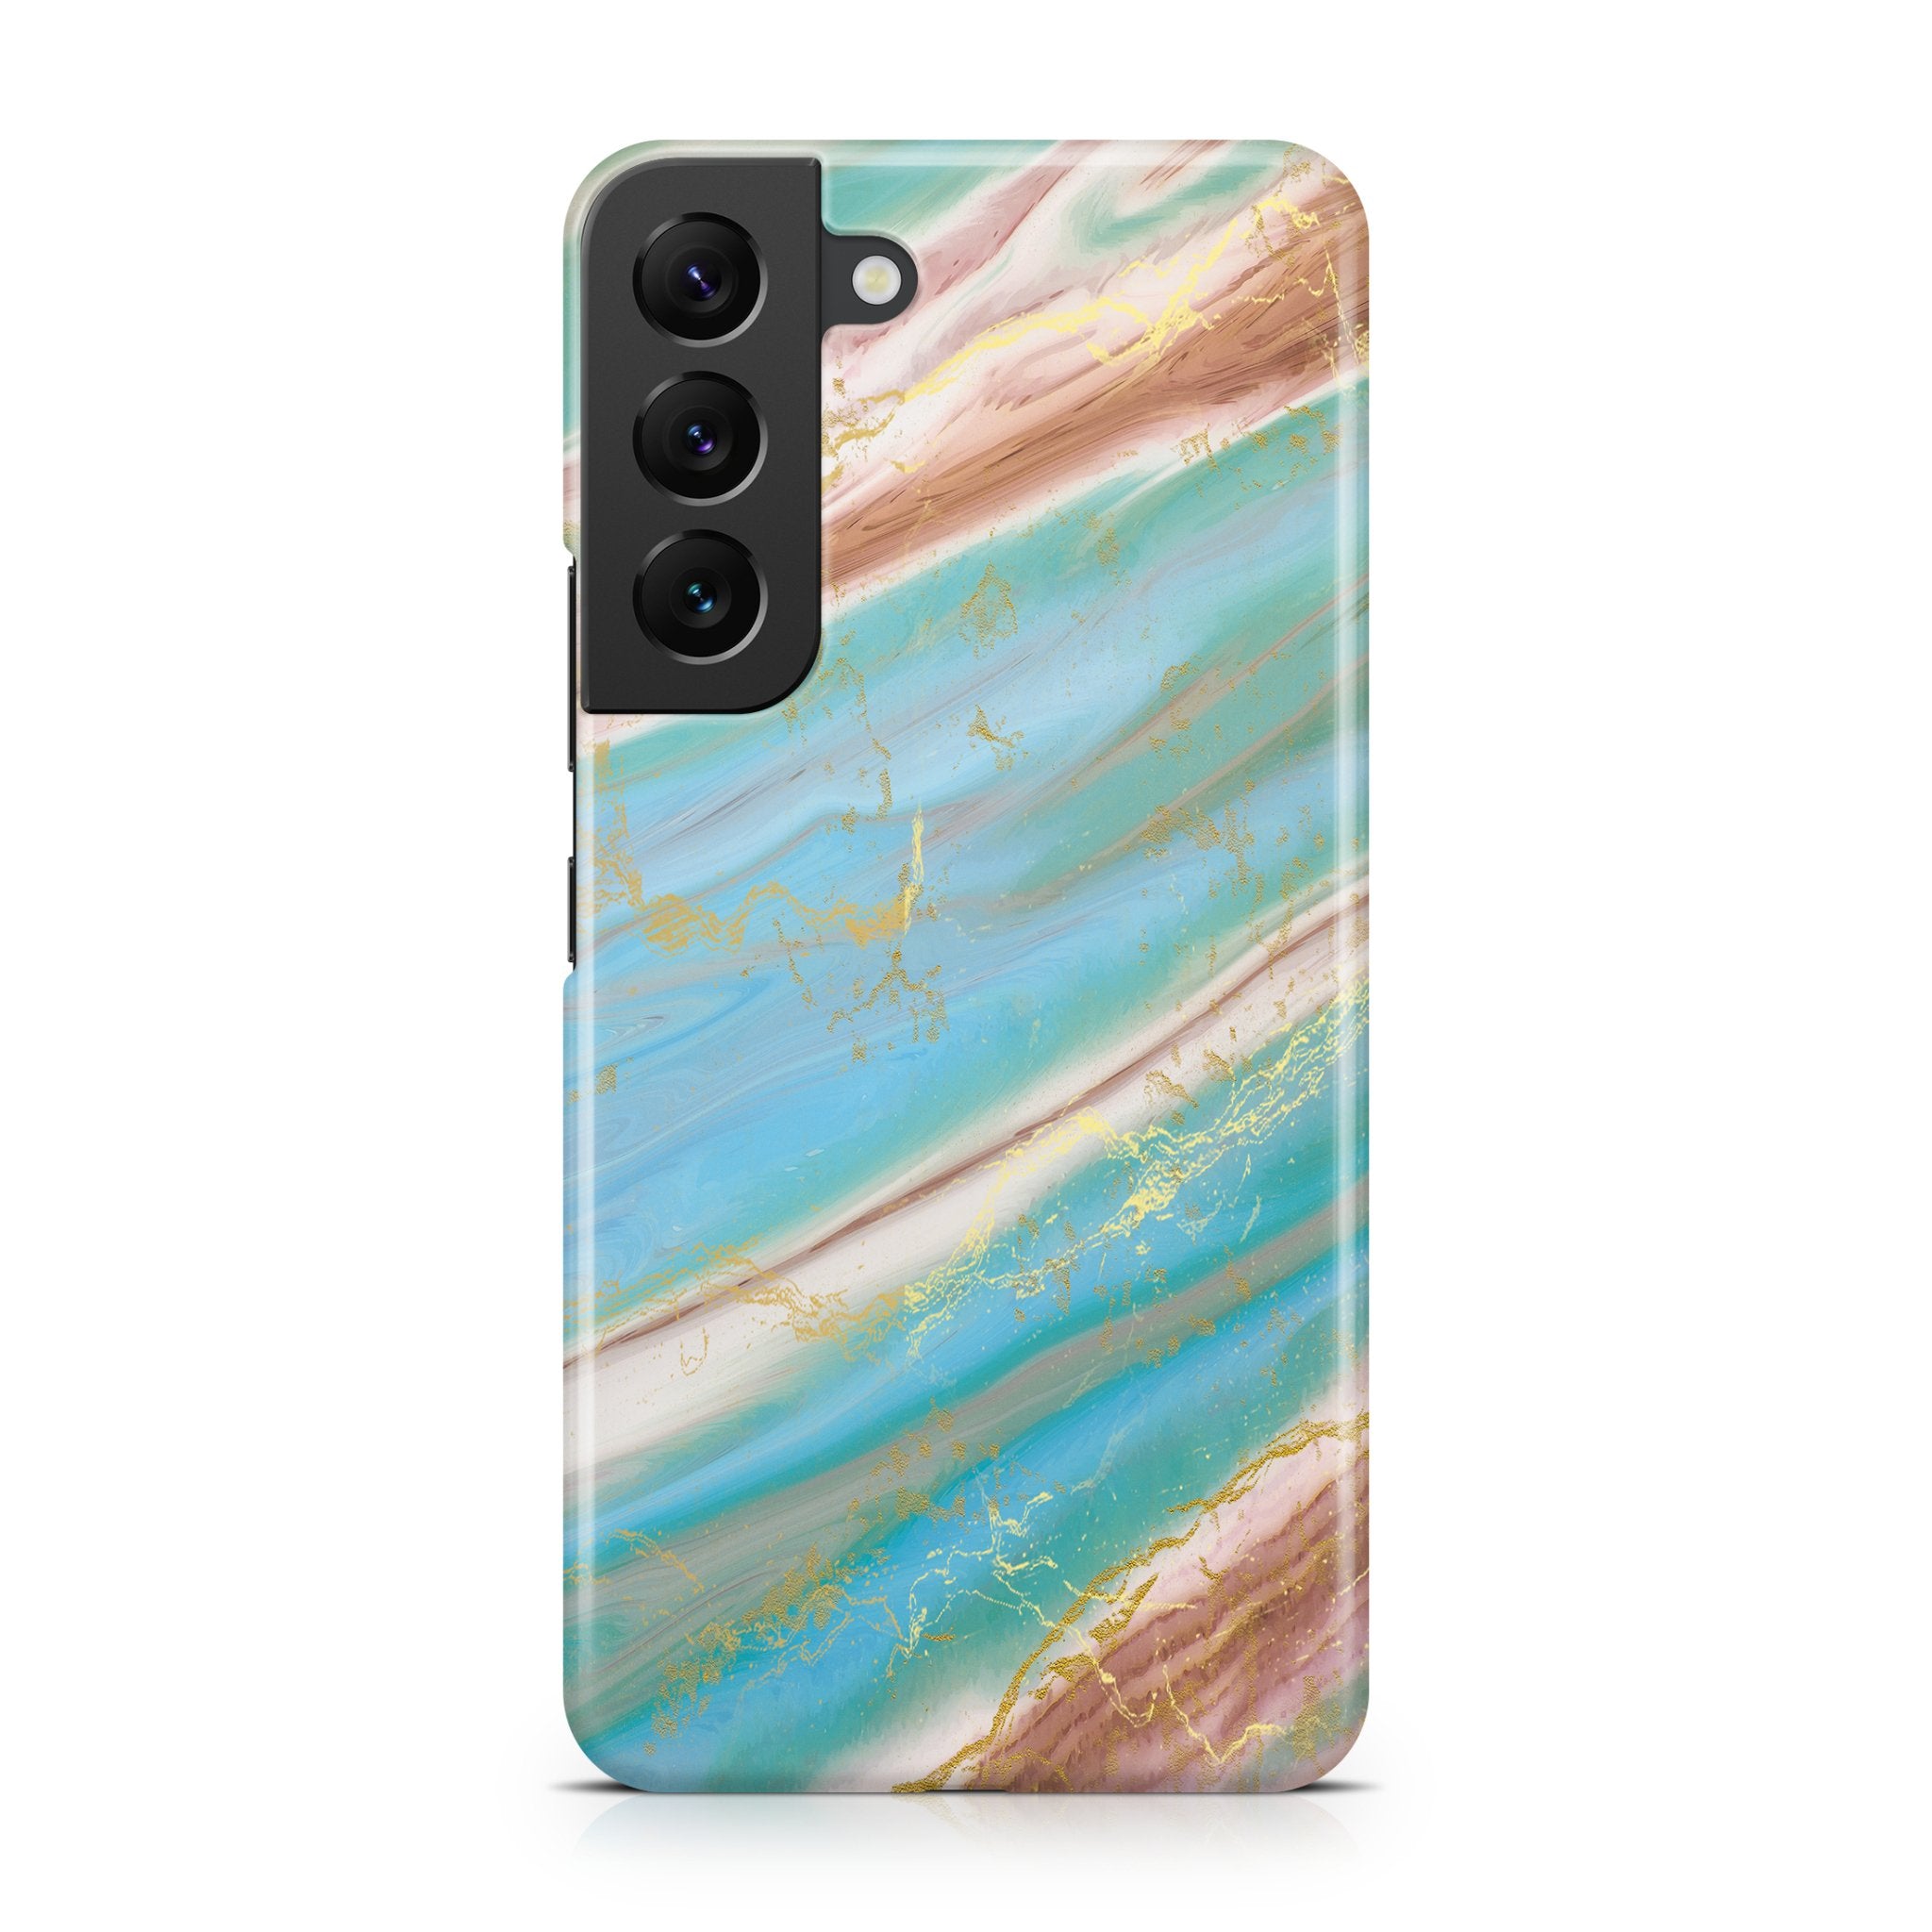 Southern Agate - Samsung phone case designs by CaseSwagger